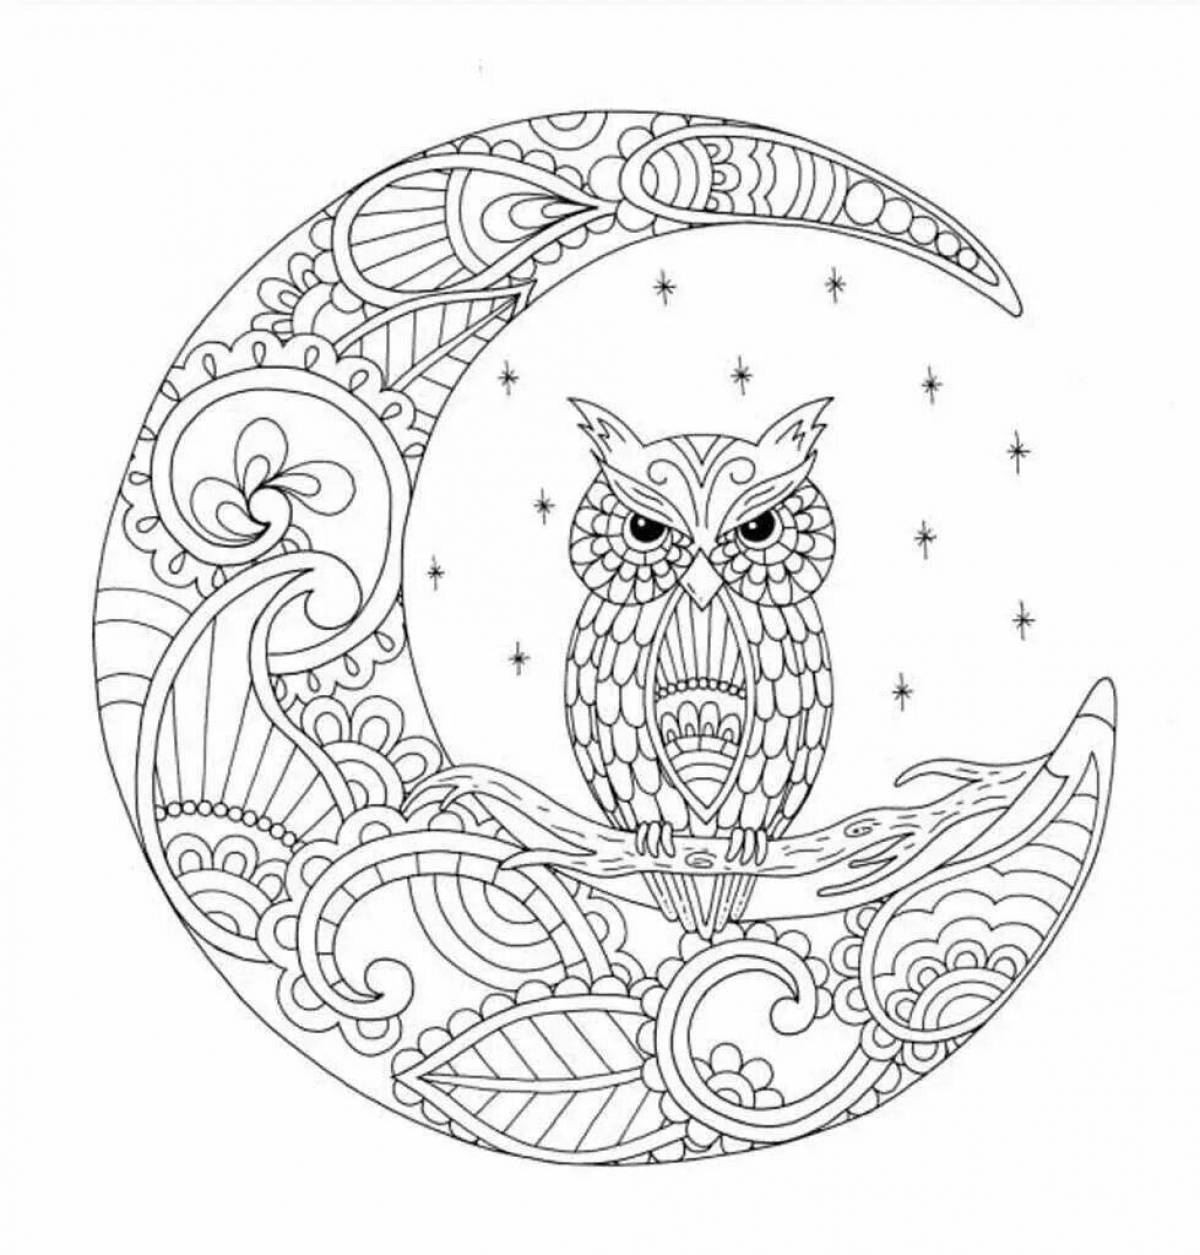 Exquisite anti-stress coloring book for adults